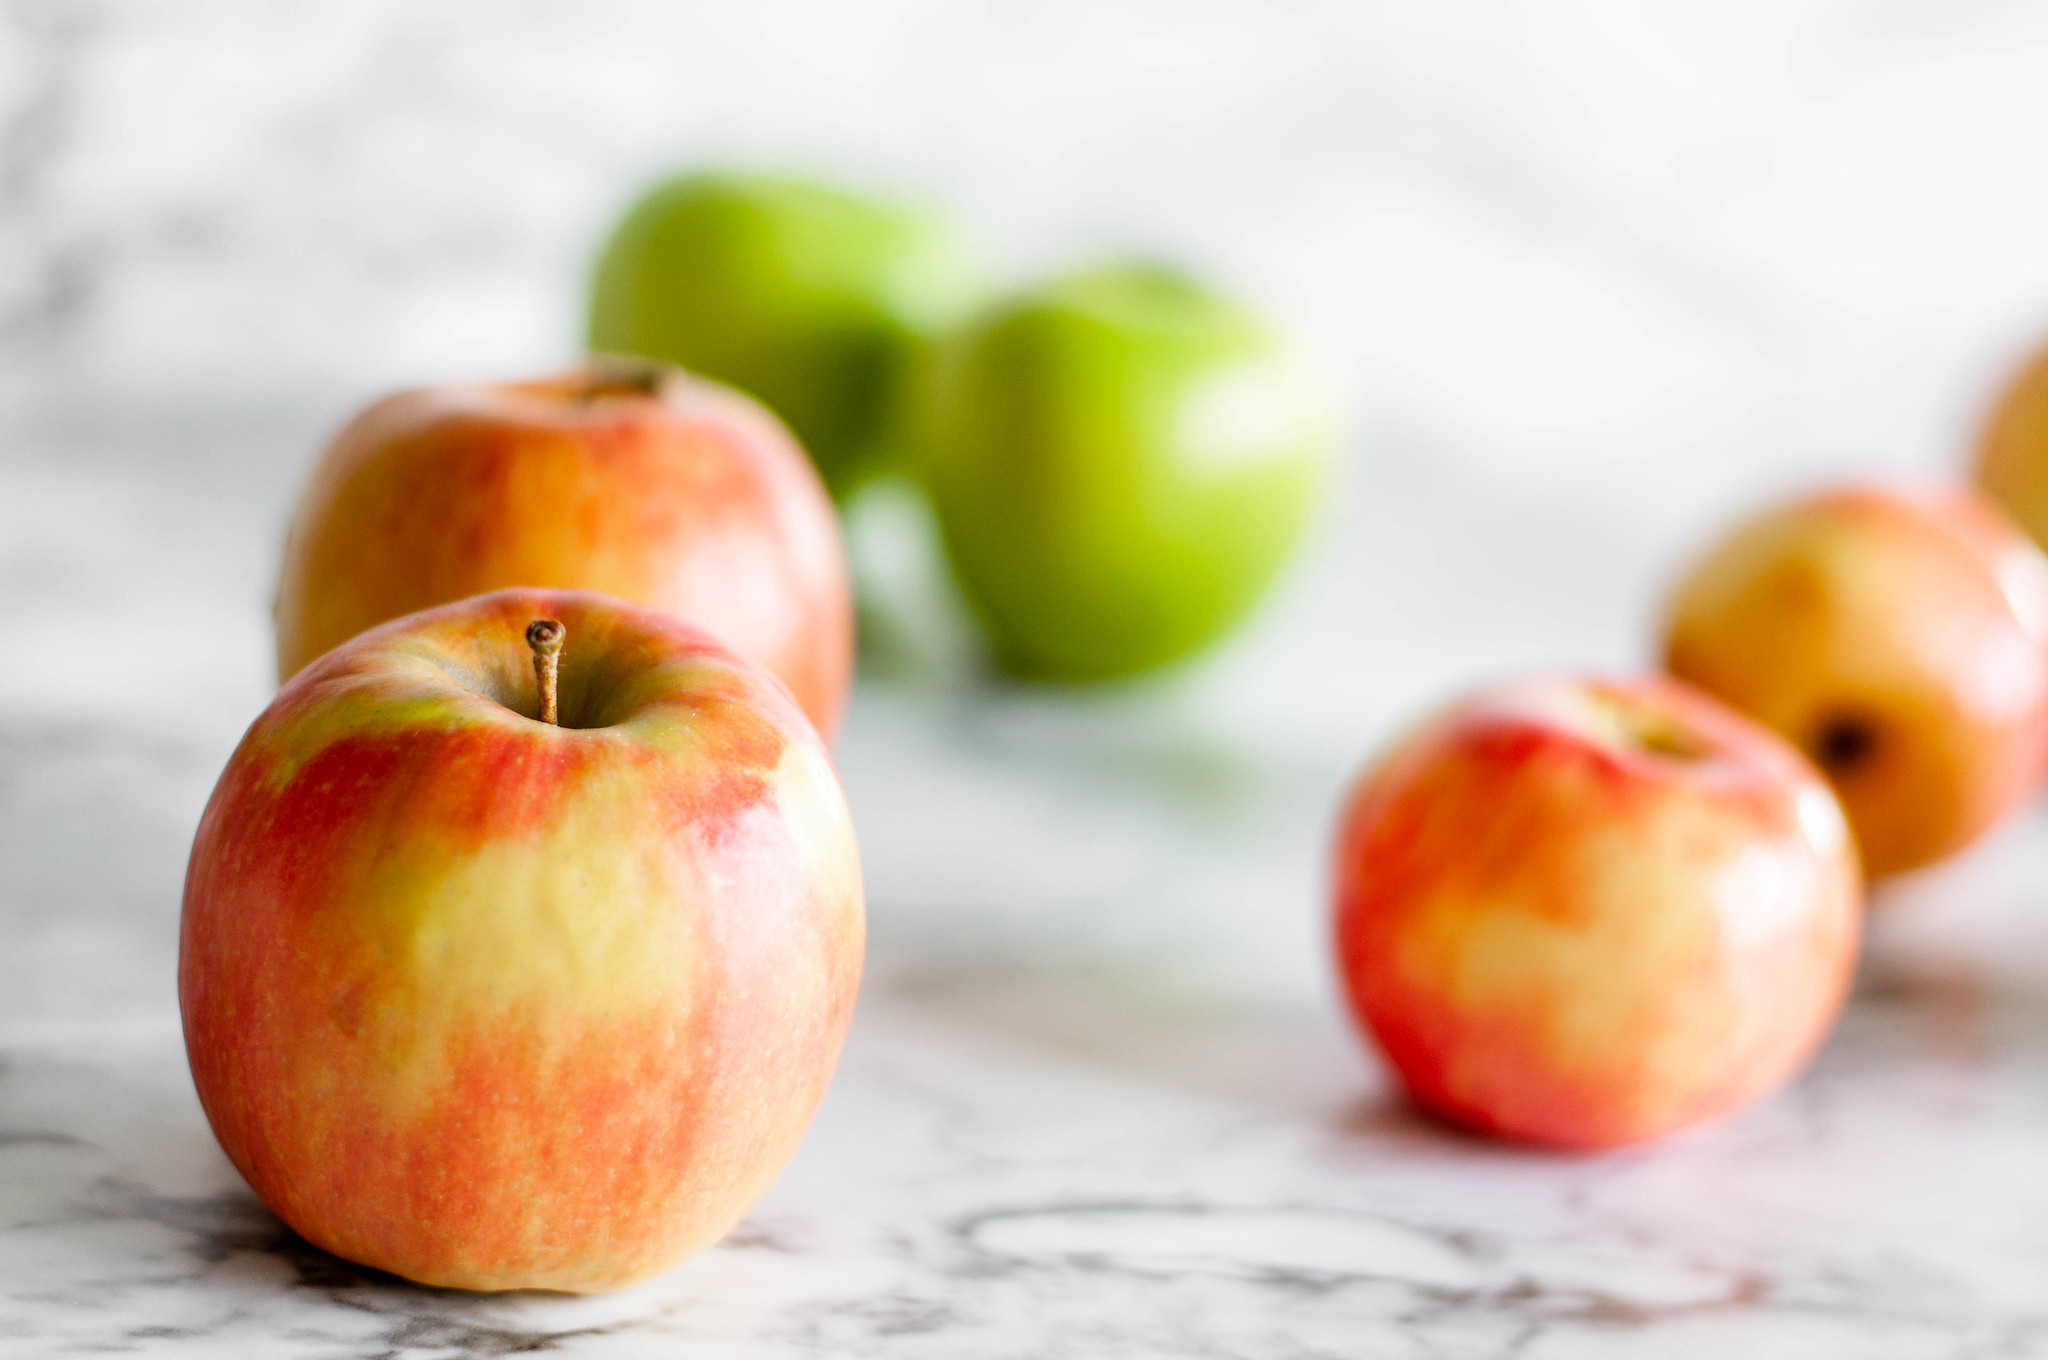 Today I'm sharing a guide to the best apples for baking. My 5 favorites for apples pies, crisps and more are included. Honeycrisp, Granny Smith, Jonagold, Braeburn and Pink Lady all made the cut.